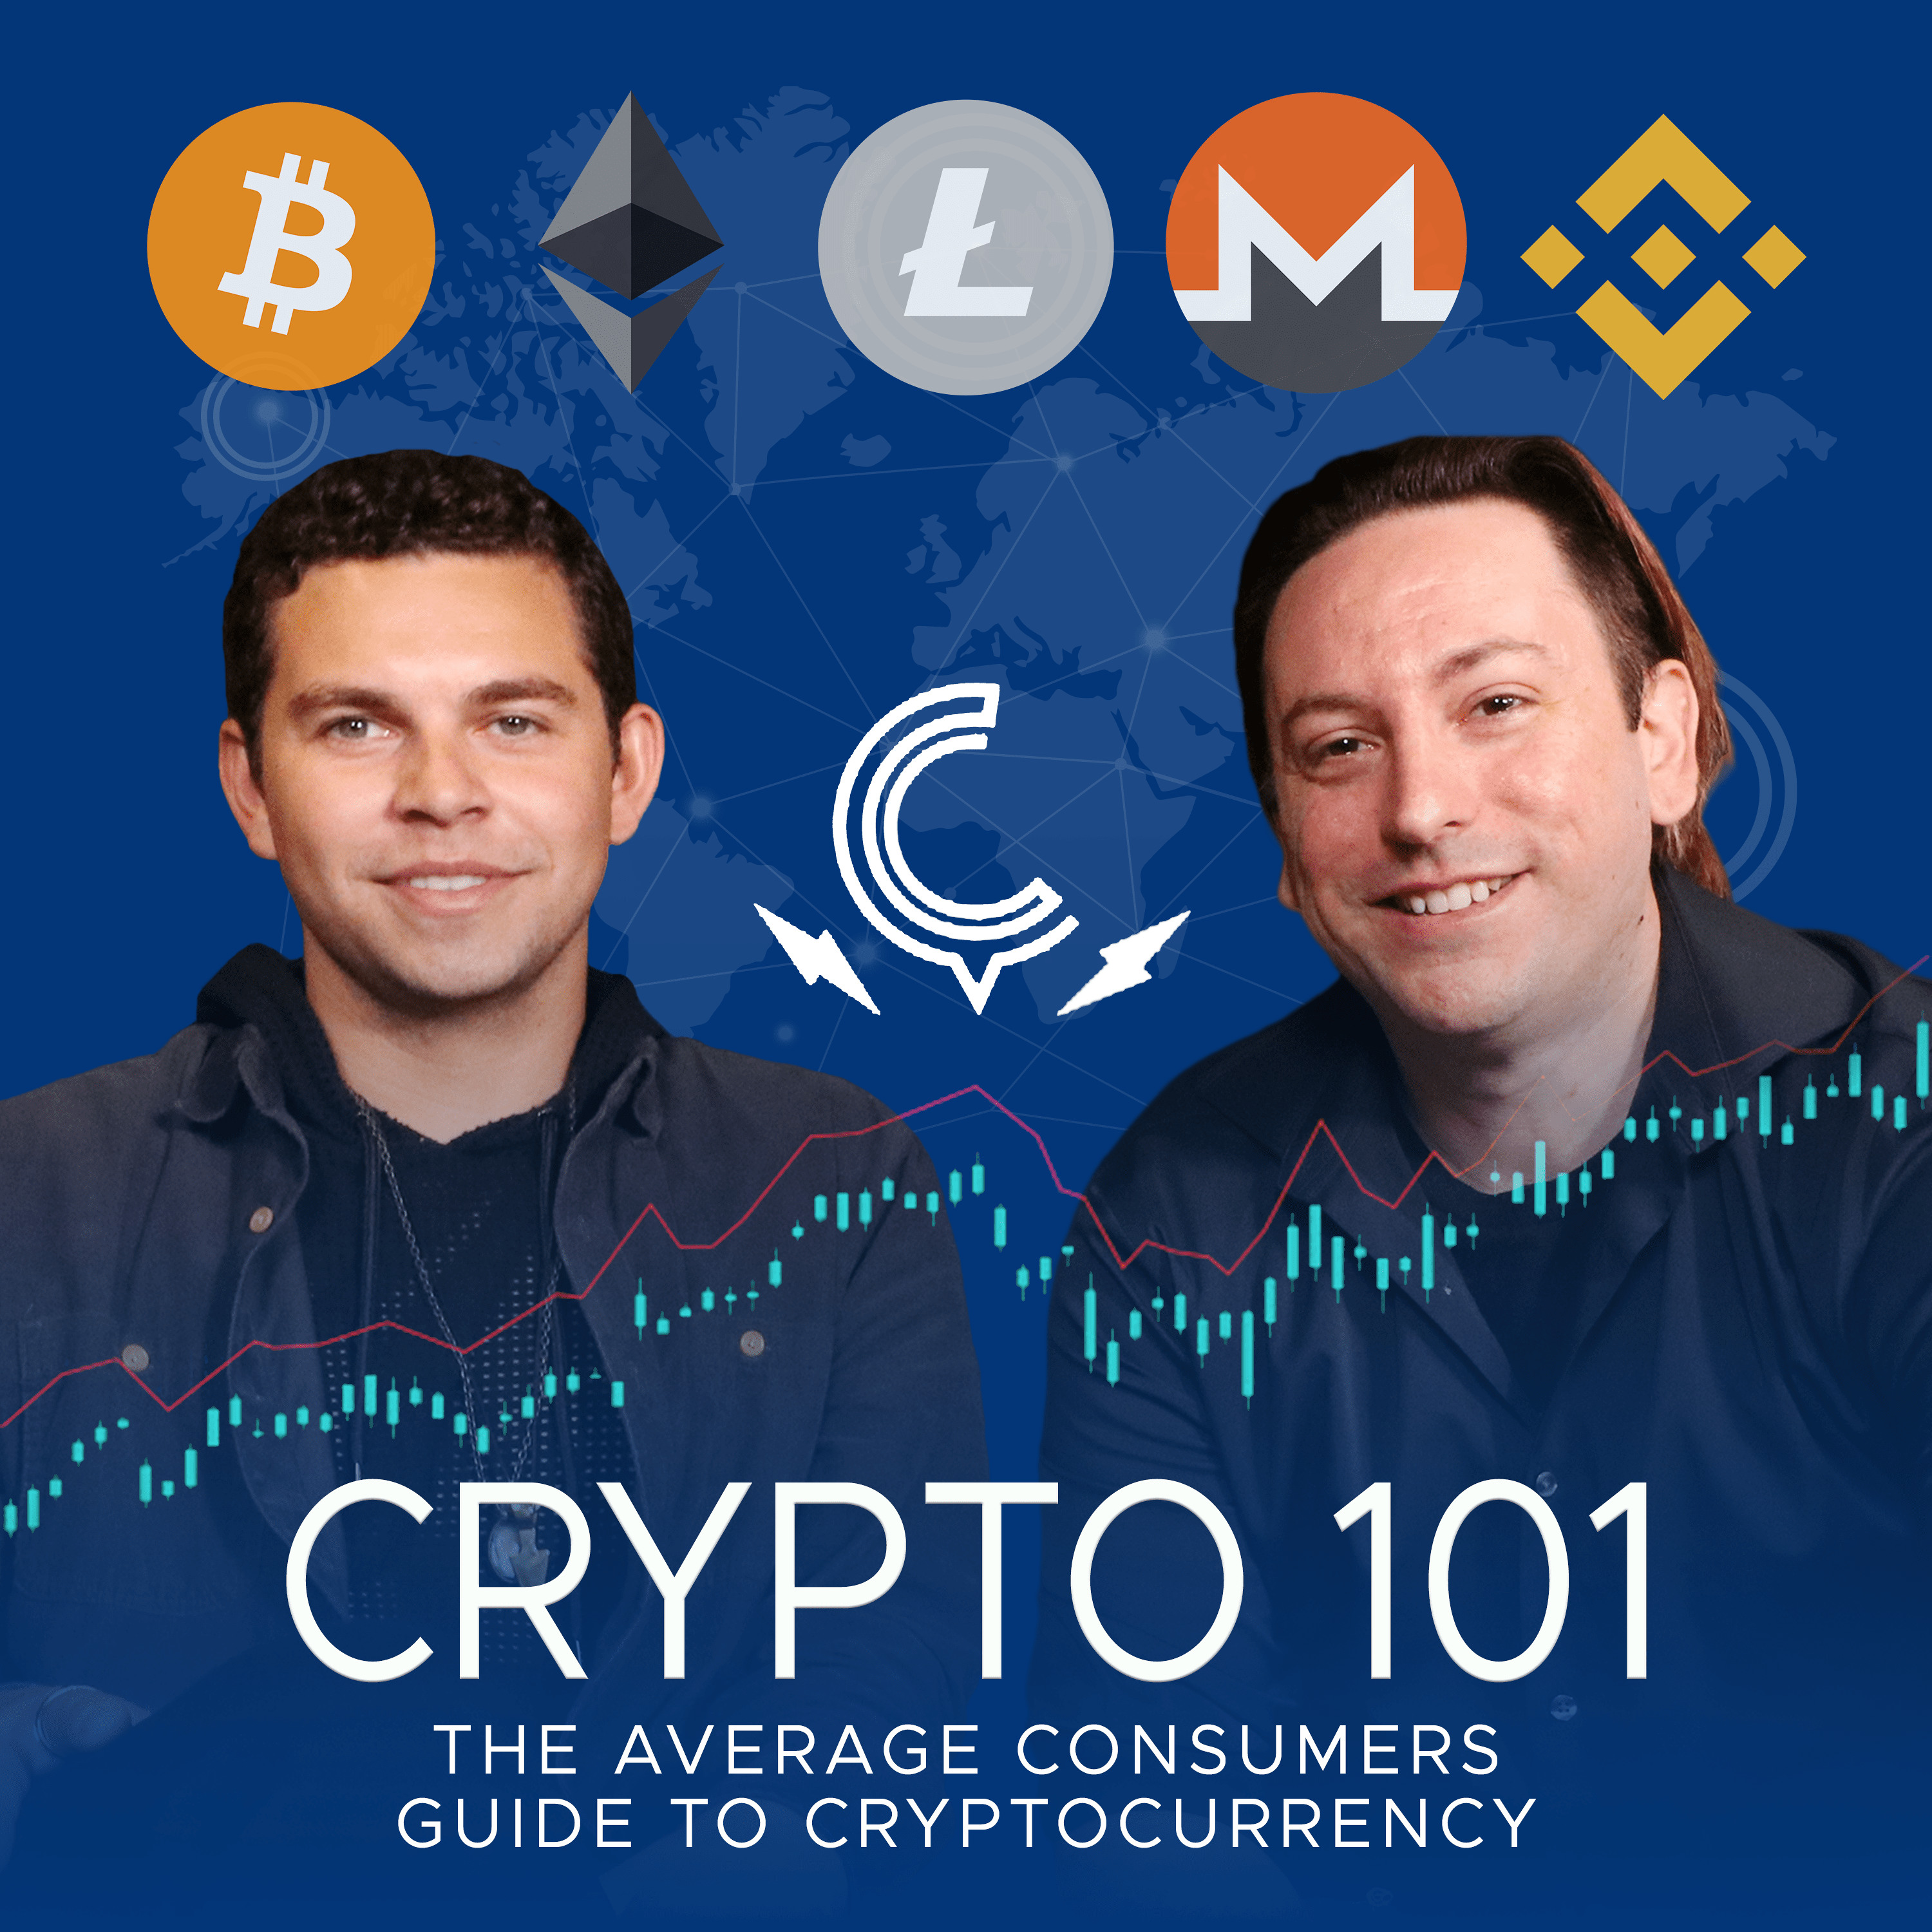 Ep. 78 - Guest Host Roni Rose & UCLA Cyber Days Event: Win Tickets at CRYPTO 101 FB Page